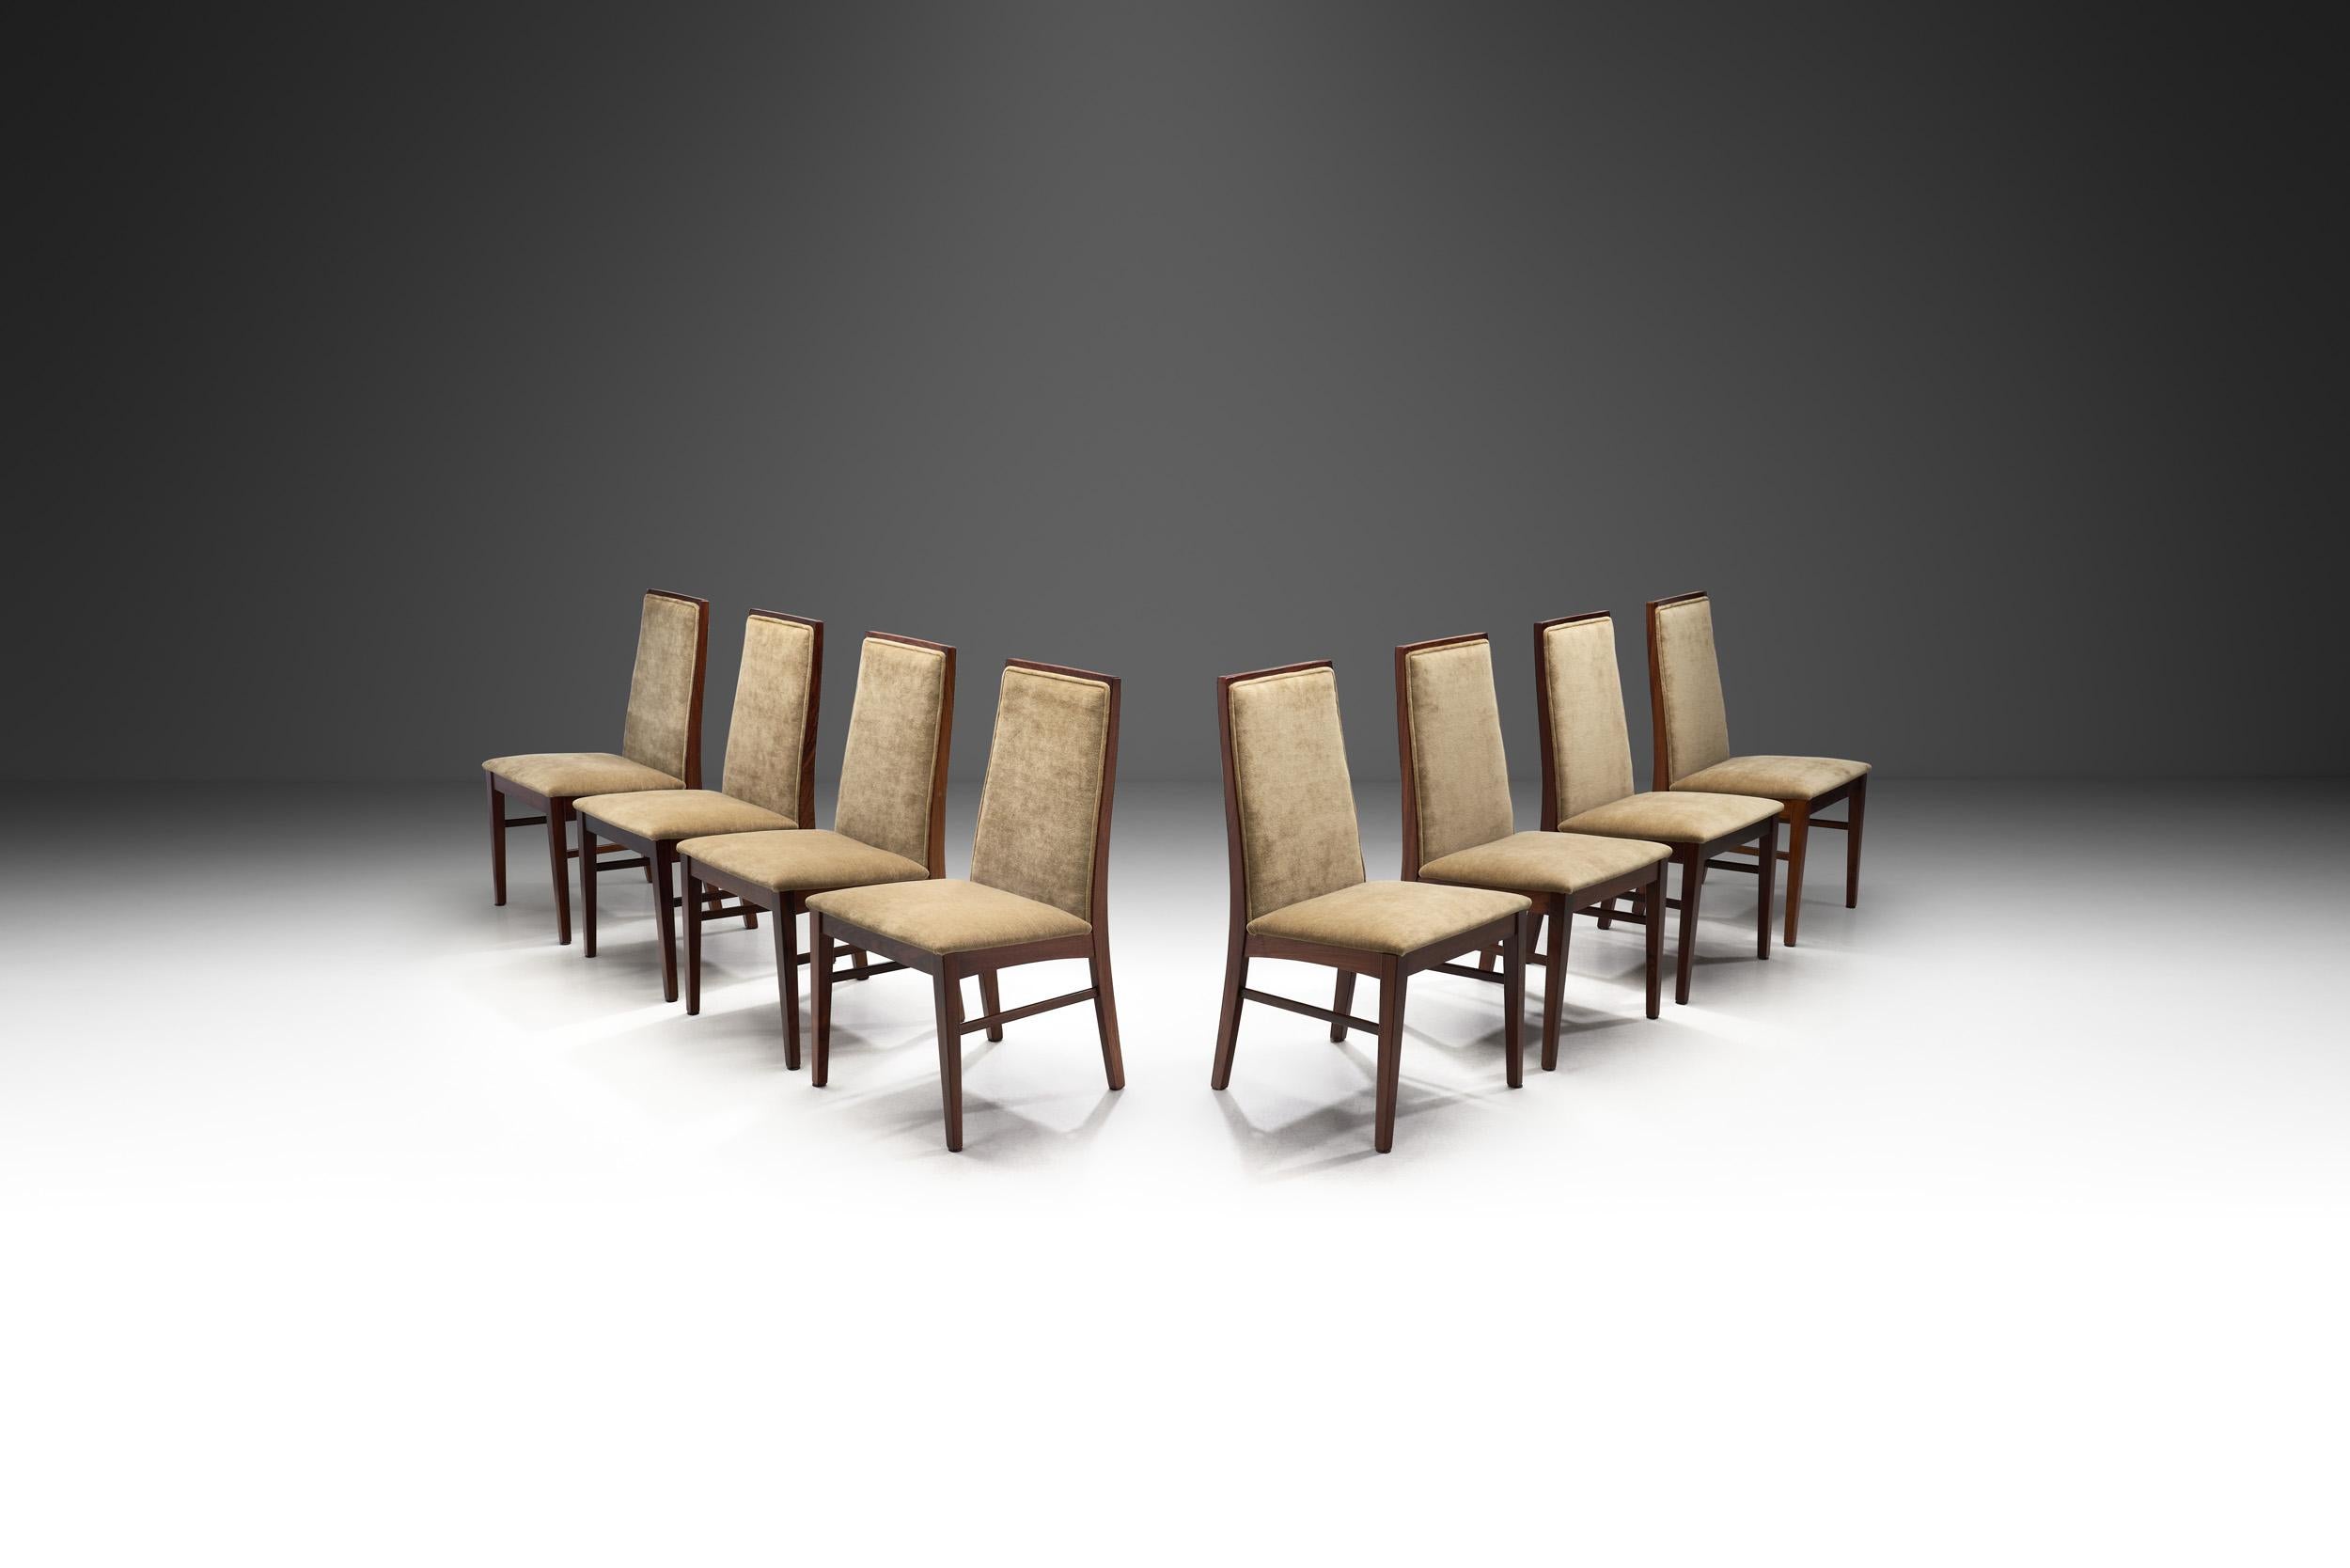 Dyrlund, a renowned Danish furniture manufacturer founded in 1960, was instrumental in shaping the mid-century modern movement with impeccable attention paid to detail and timeless design sensibilities. This set of eight model “7866” dining chairs